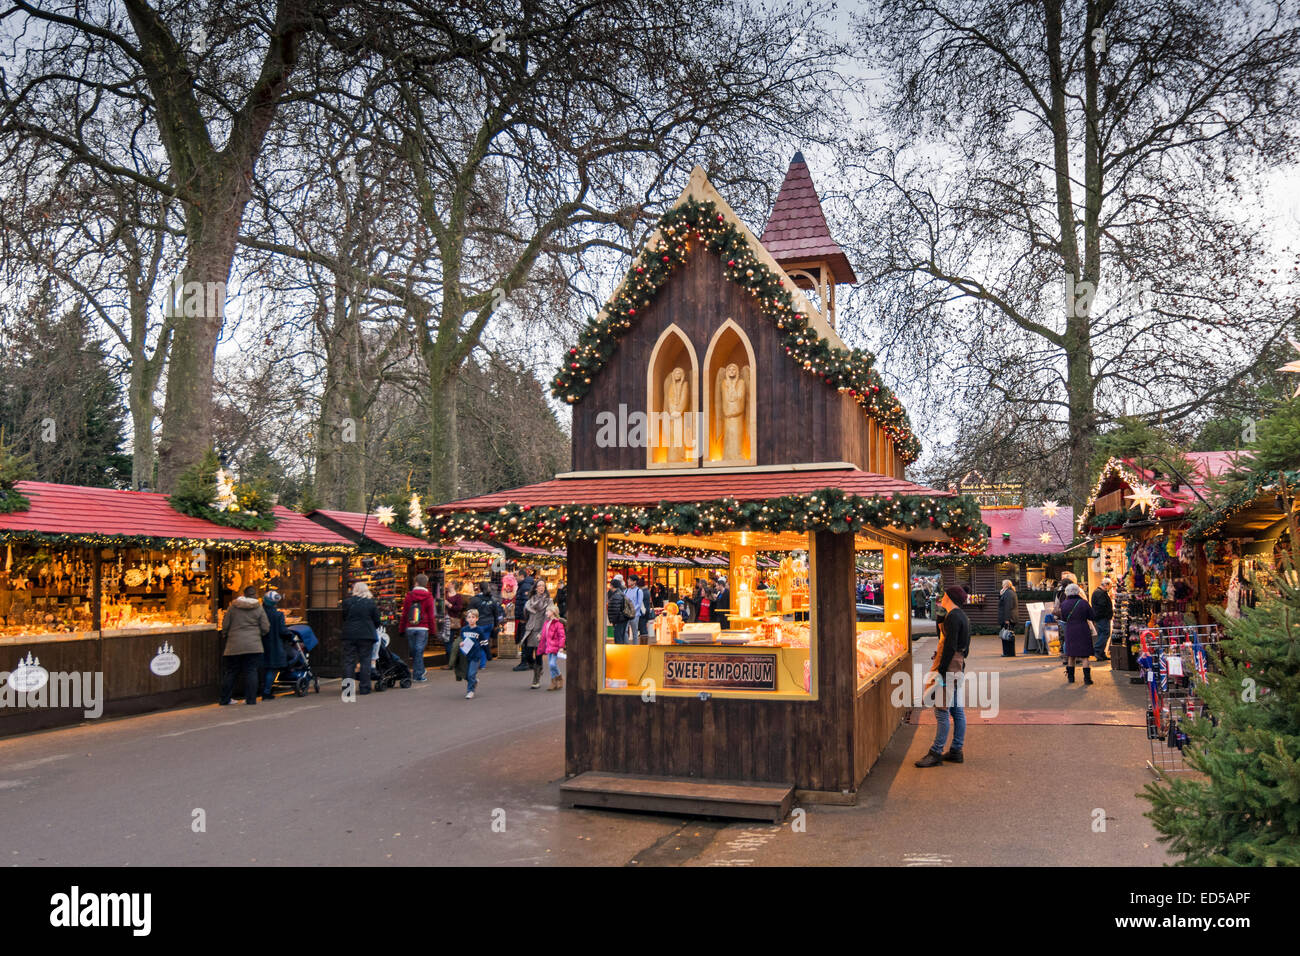 LONDON WINTER WONDERLAND IN HYDE PARK A WOODEN CHURCH SELLING SWEETS Stock Photo